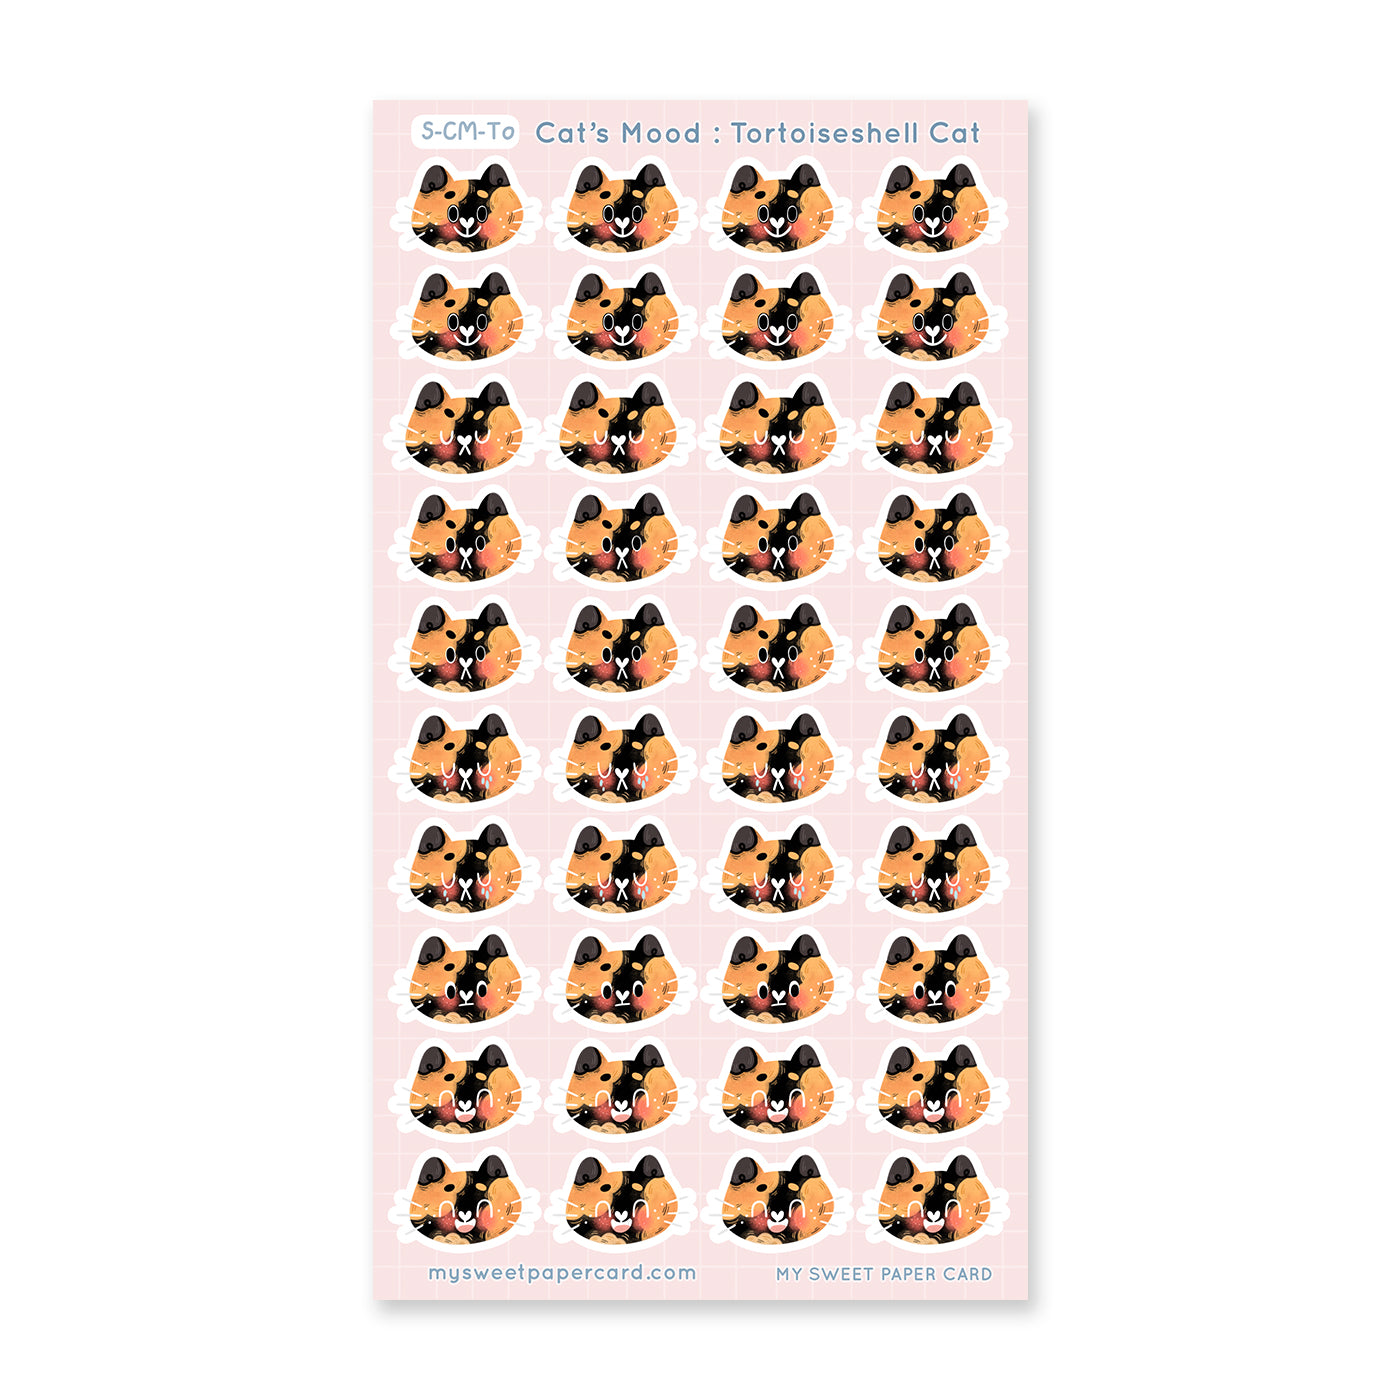 tortoiseshell cat stickers sheet with different moods